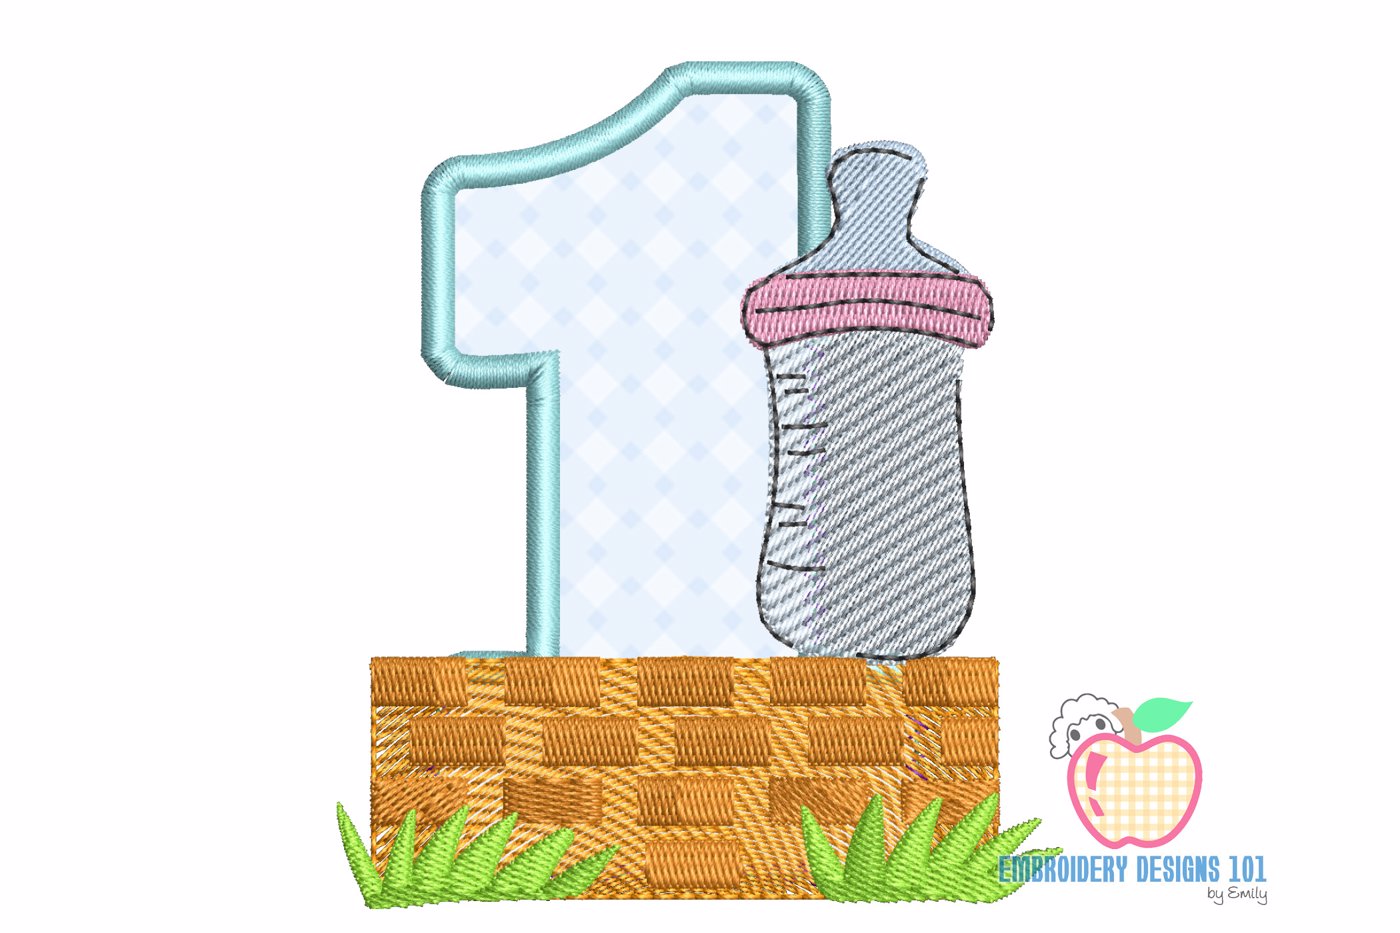 The Baby Bottle To Feed Applique for kids